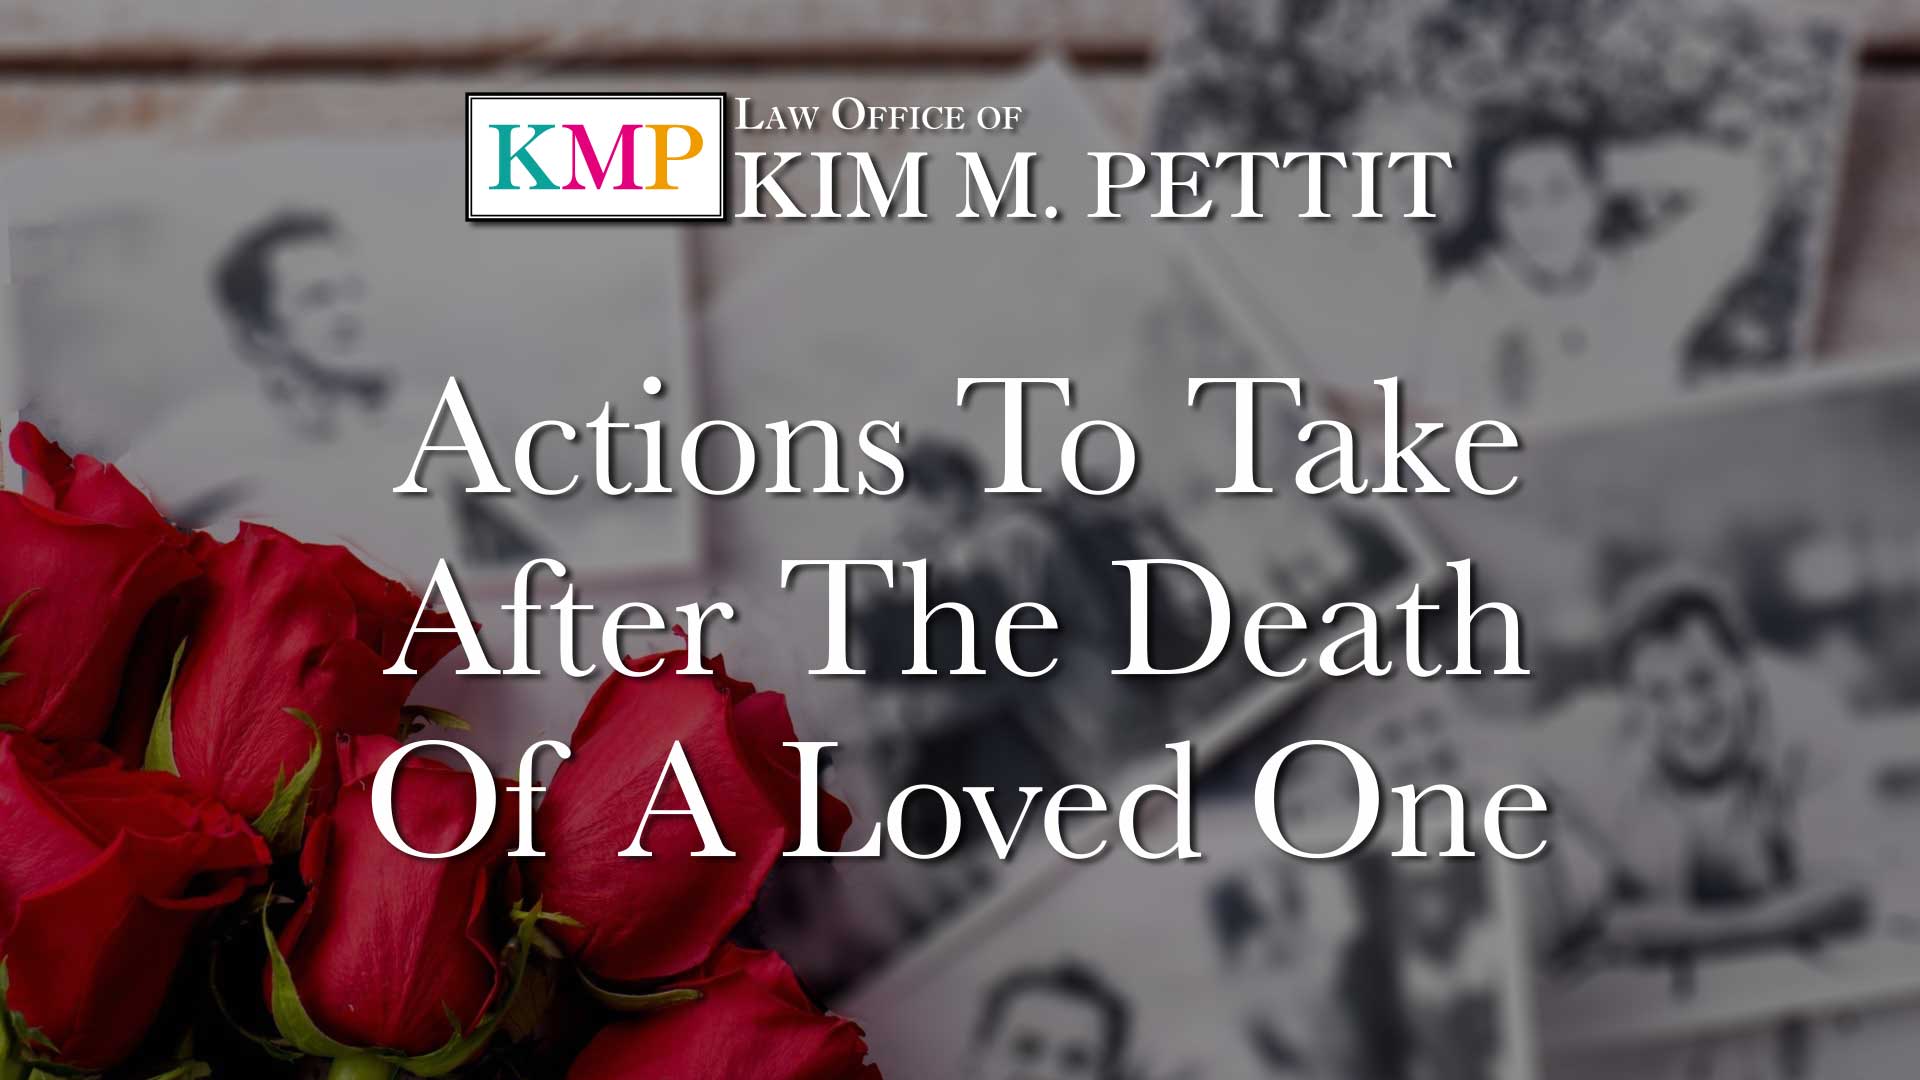 Actions to Take After the Death of a Loved One